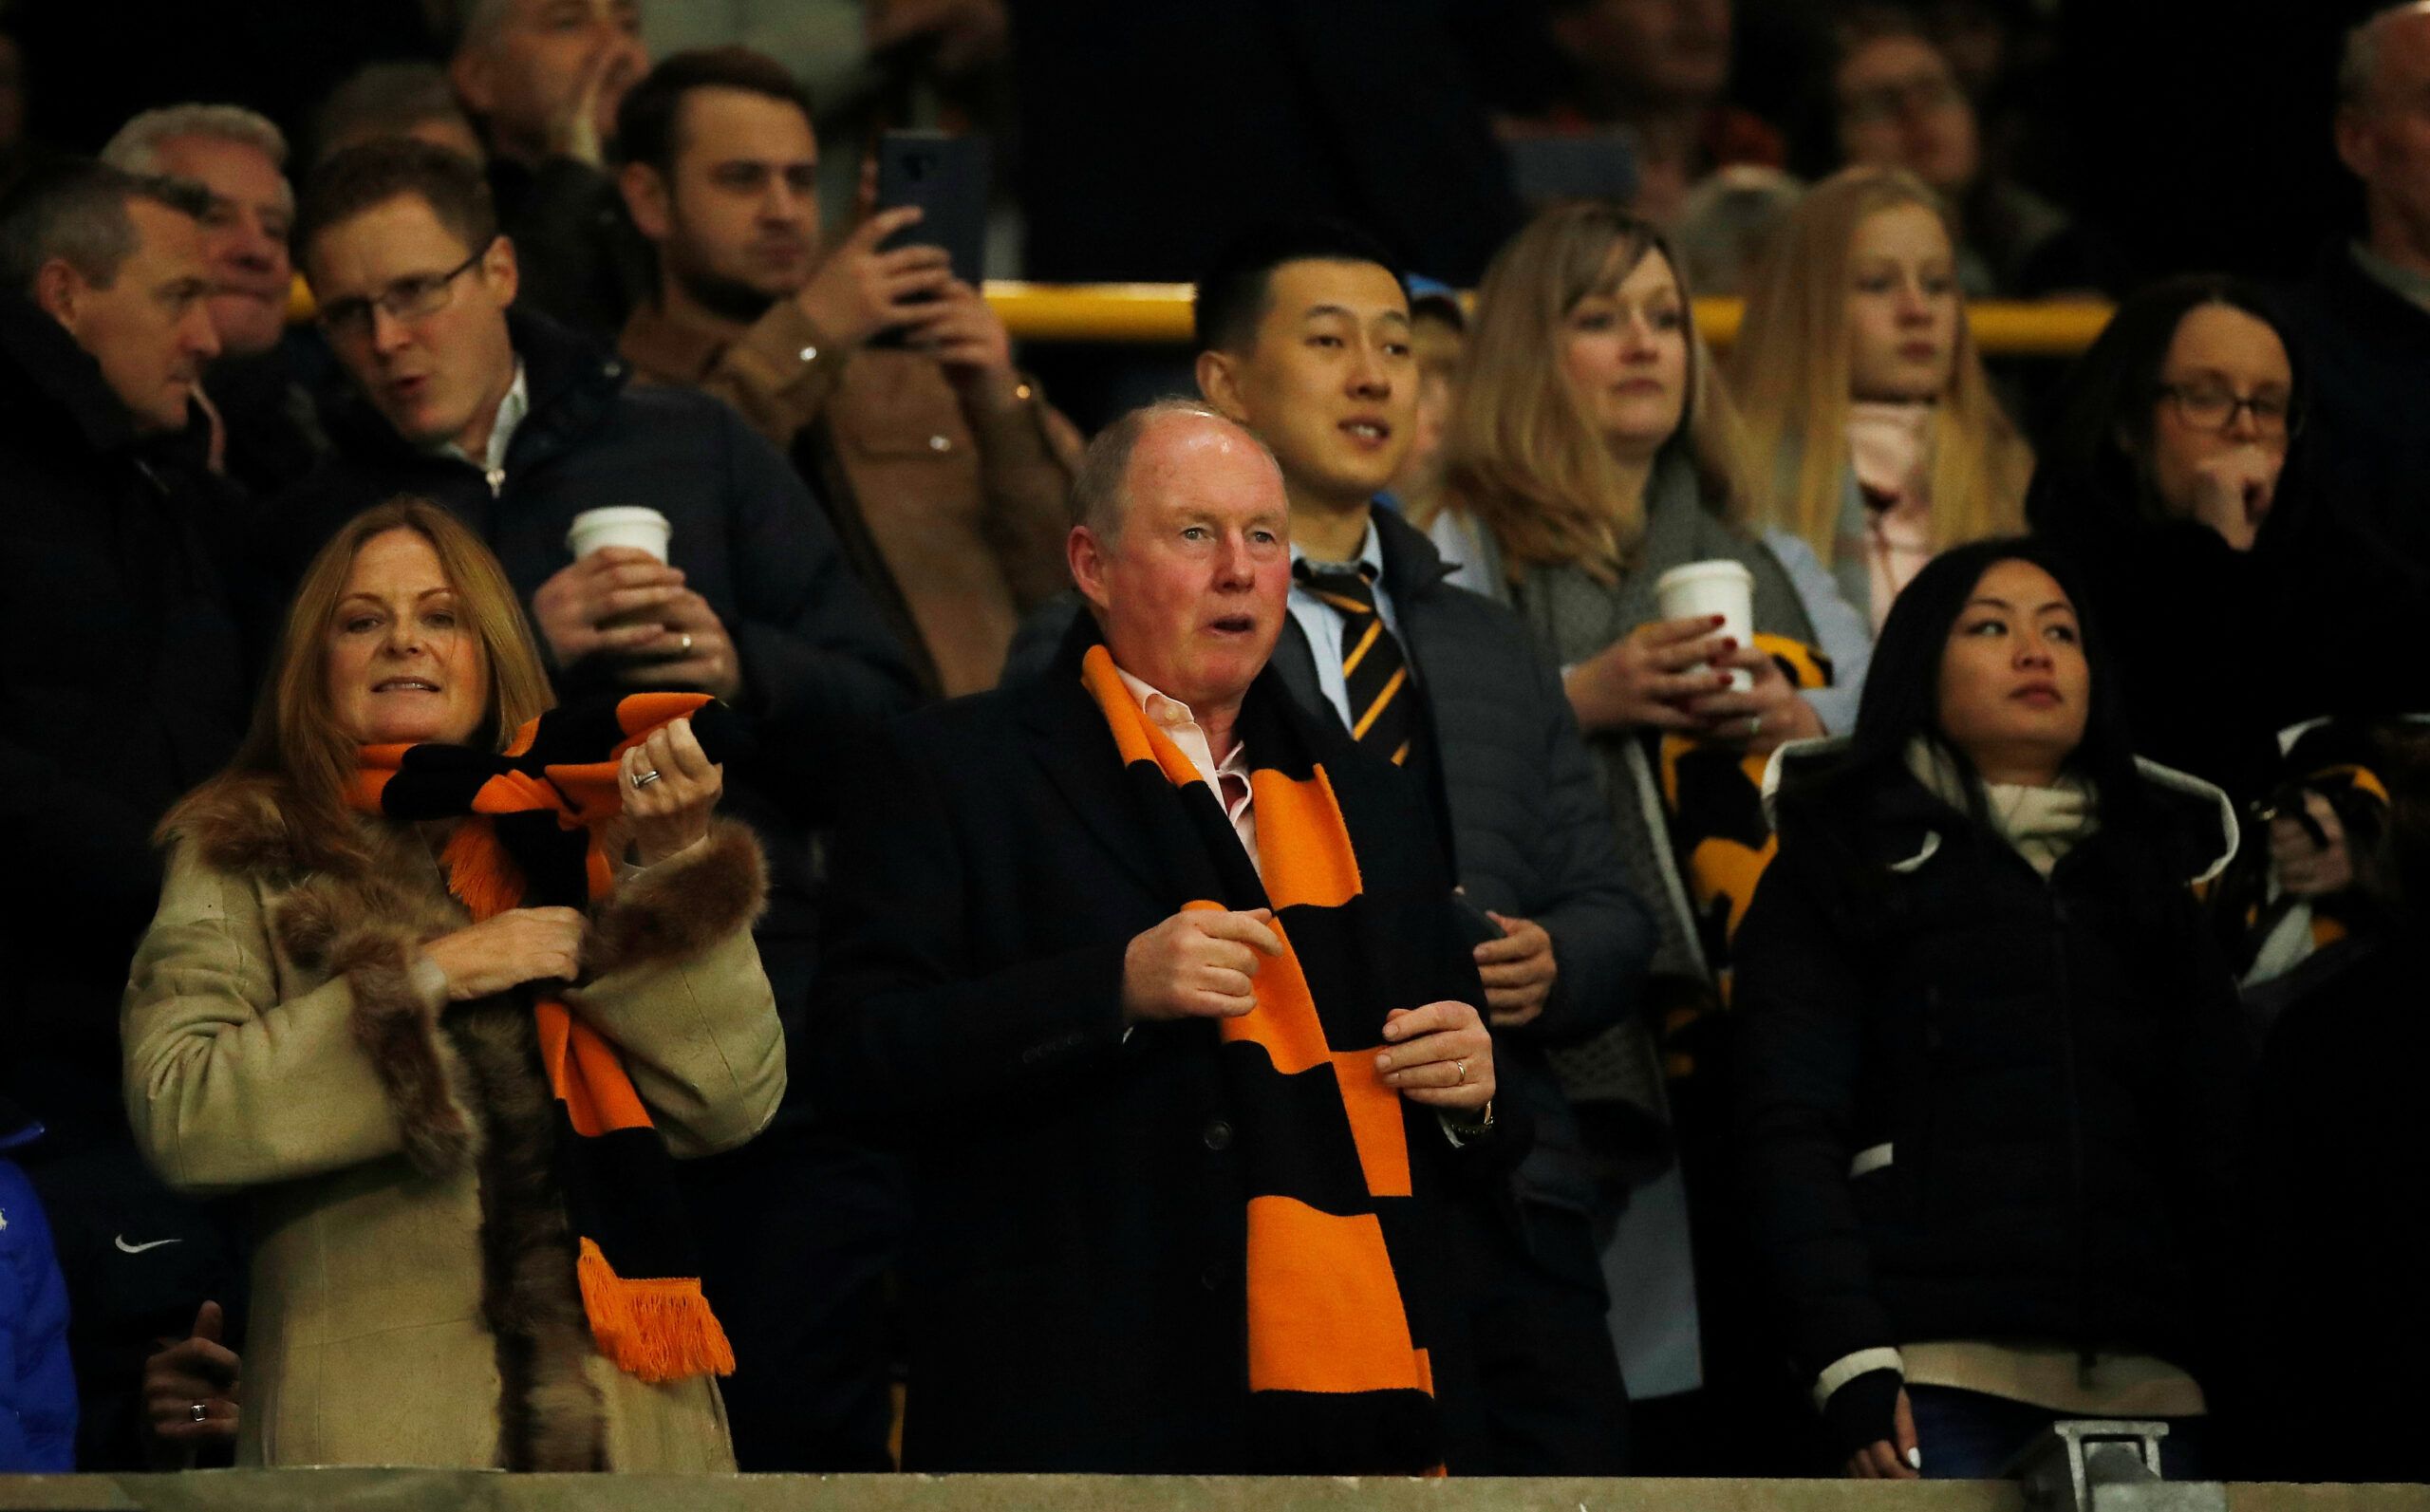 Soccer Football - Premier League - Wolverhampton Wanderers v Manchester City - Molineux Stadium, Wolverhampton, Britain - December 27, 2019  Wolverhampton Wanderers' former chairman Steve Morgan in the stands          Action Images via Reuters/Andrew Boyers  EDITORIAL USE ONLY. No use with unauthorized audio, video, data, fixture lists, club/league logos or 